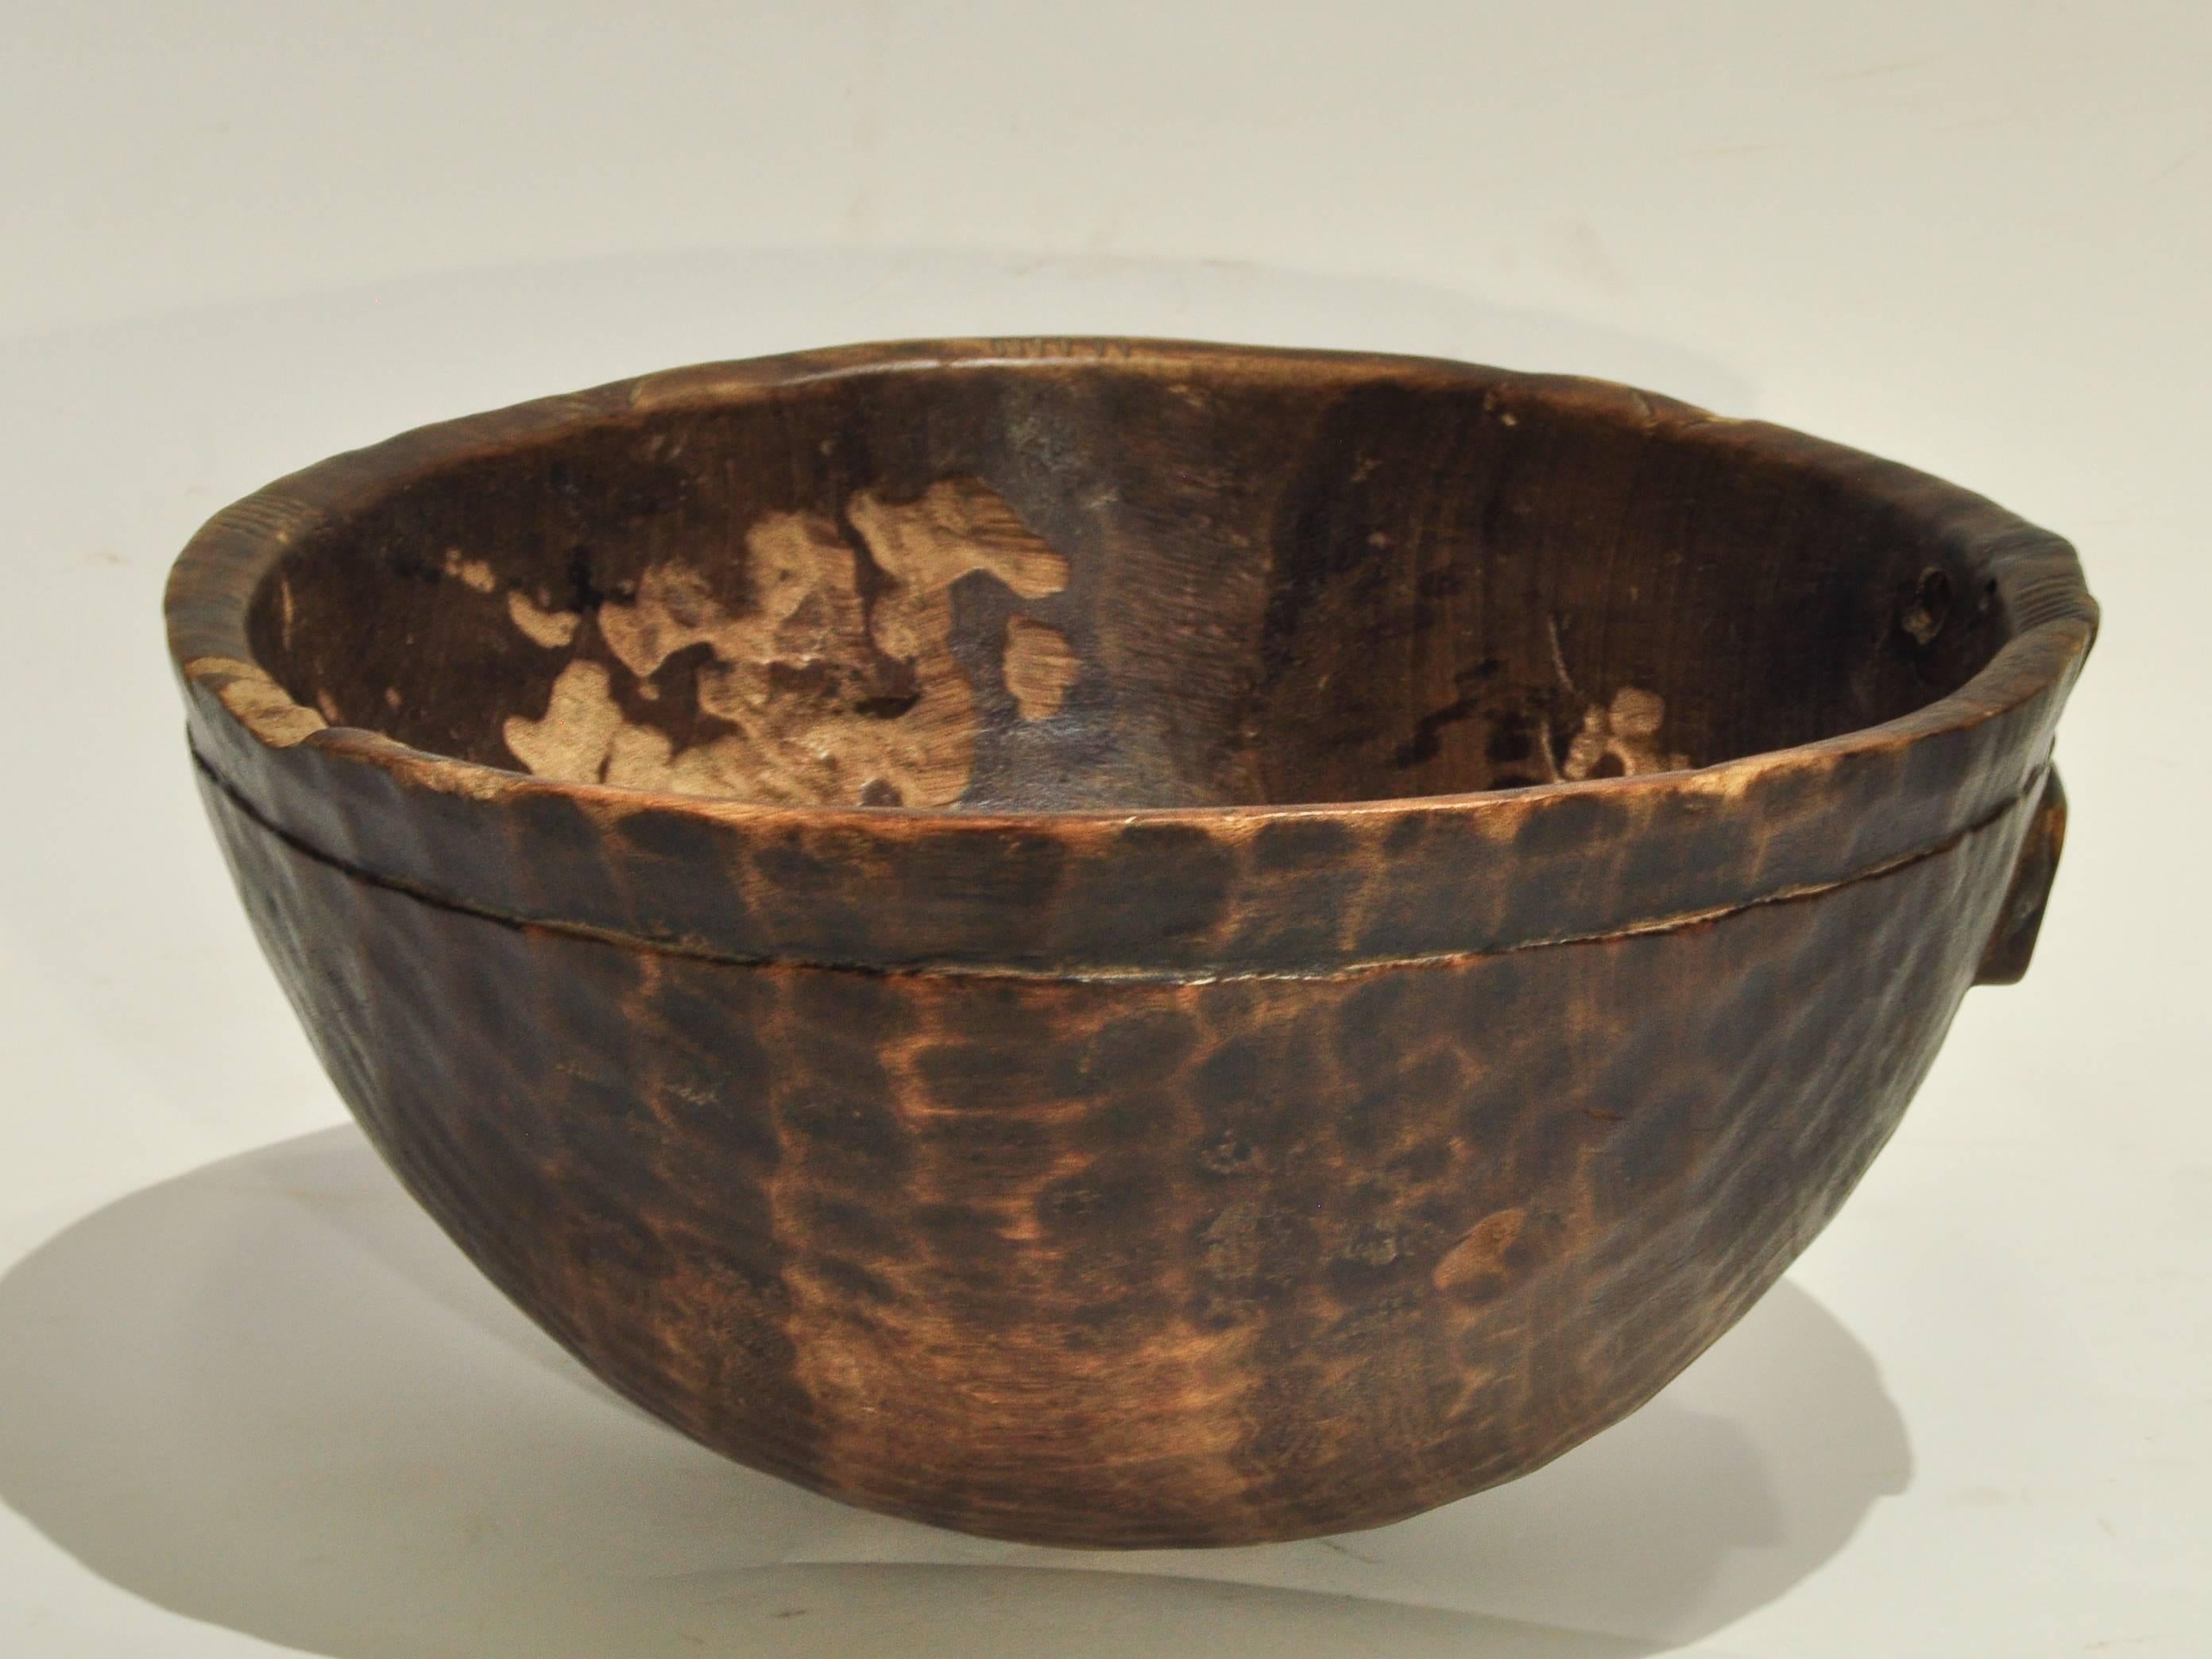 Tribal wooden bowl. Handhewn, from Mali, mid-20th century.
This rustic wooden bowl was fashioned by hand using very basic tools. The hand adzed texture of the outside surface of the bowl is particularly striking. The Inside of the bowl also has a